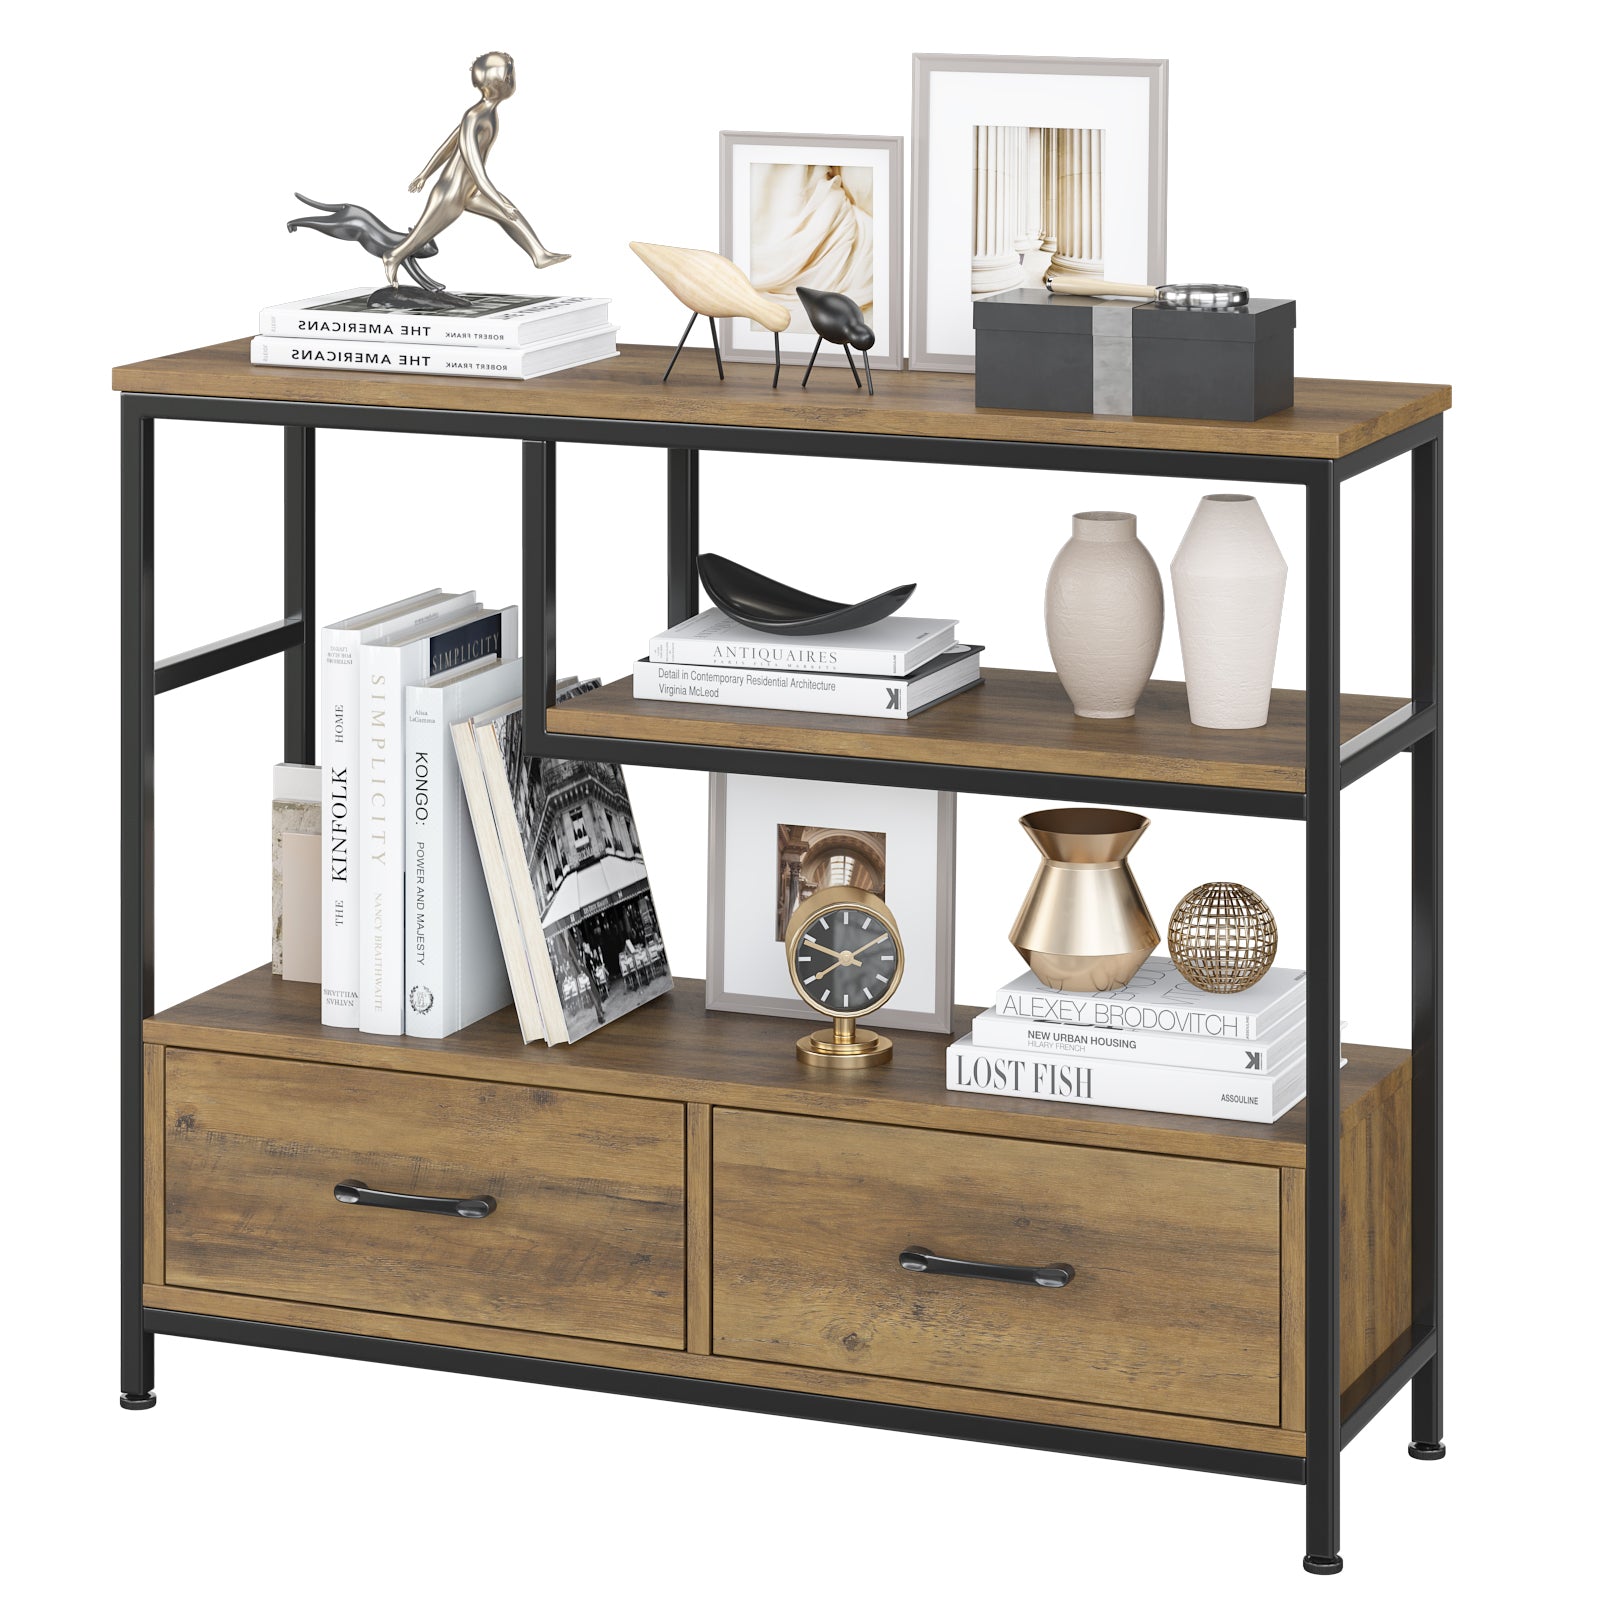 Homfa Console Table with Drawers, 3 Tier Display Storage Shelves for Entryway Hallway, Rustic Brown